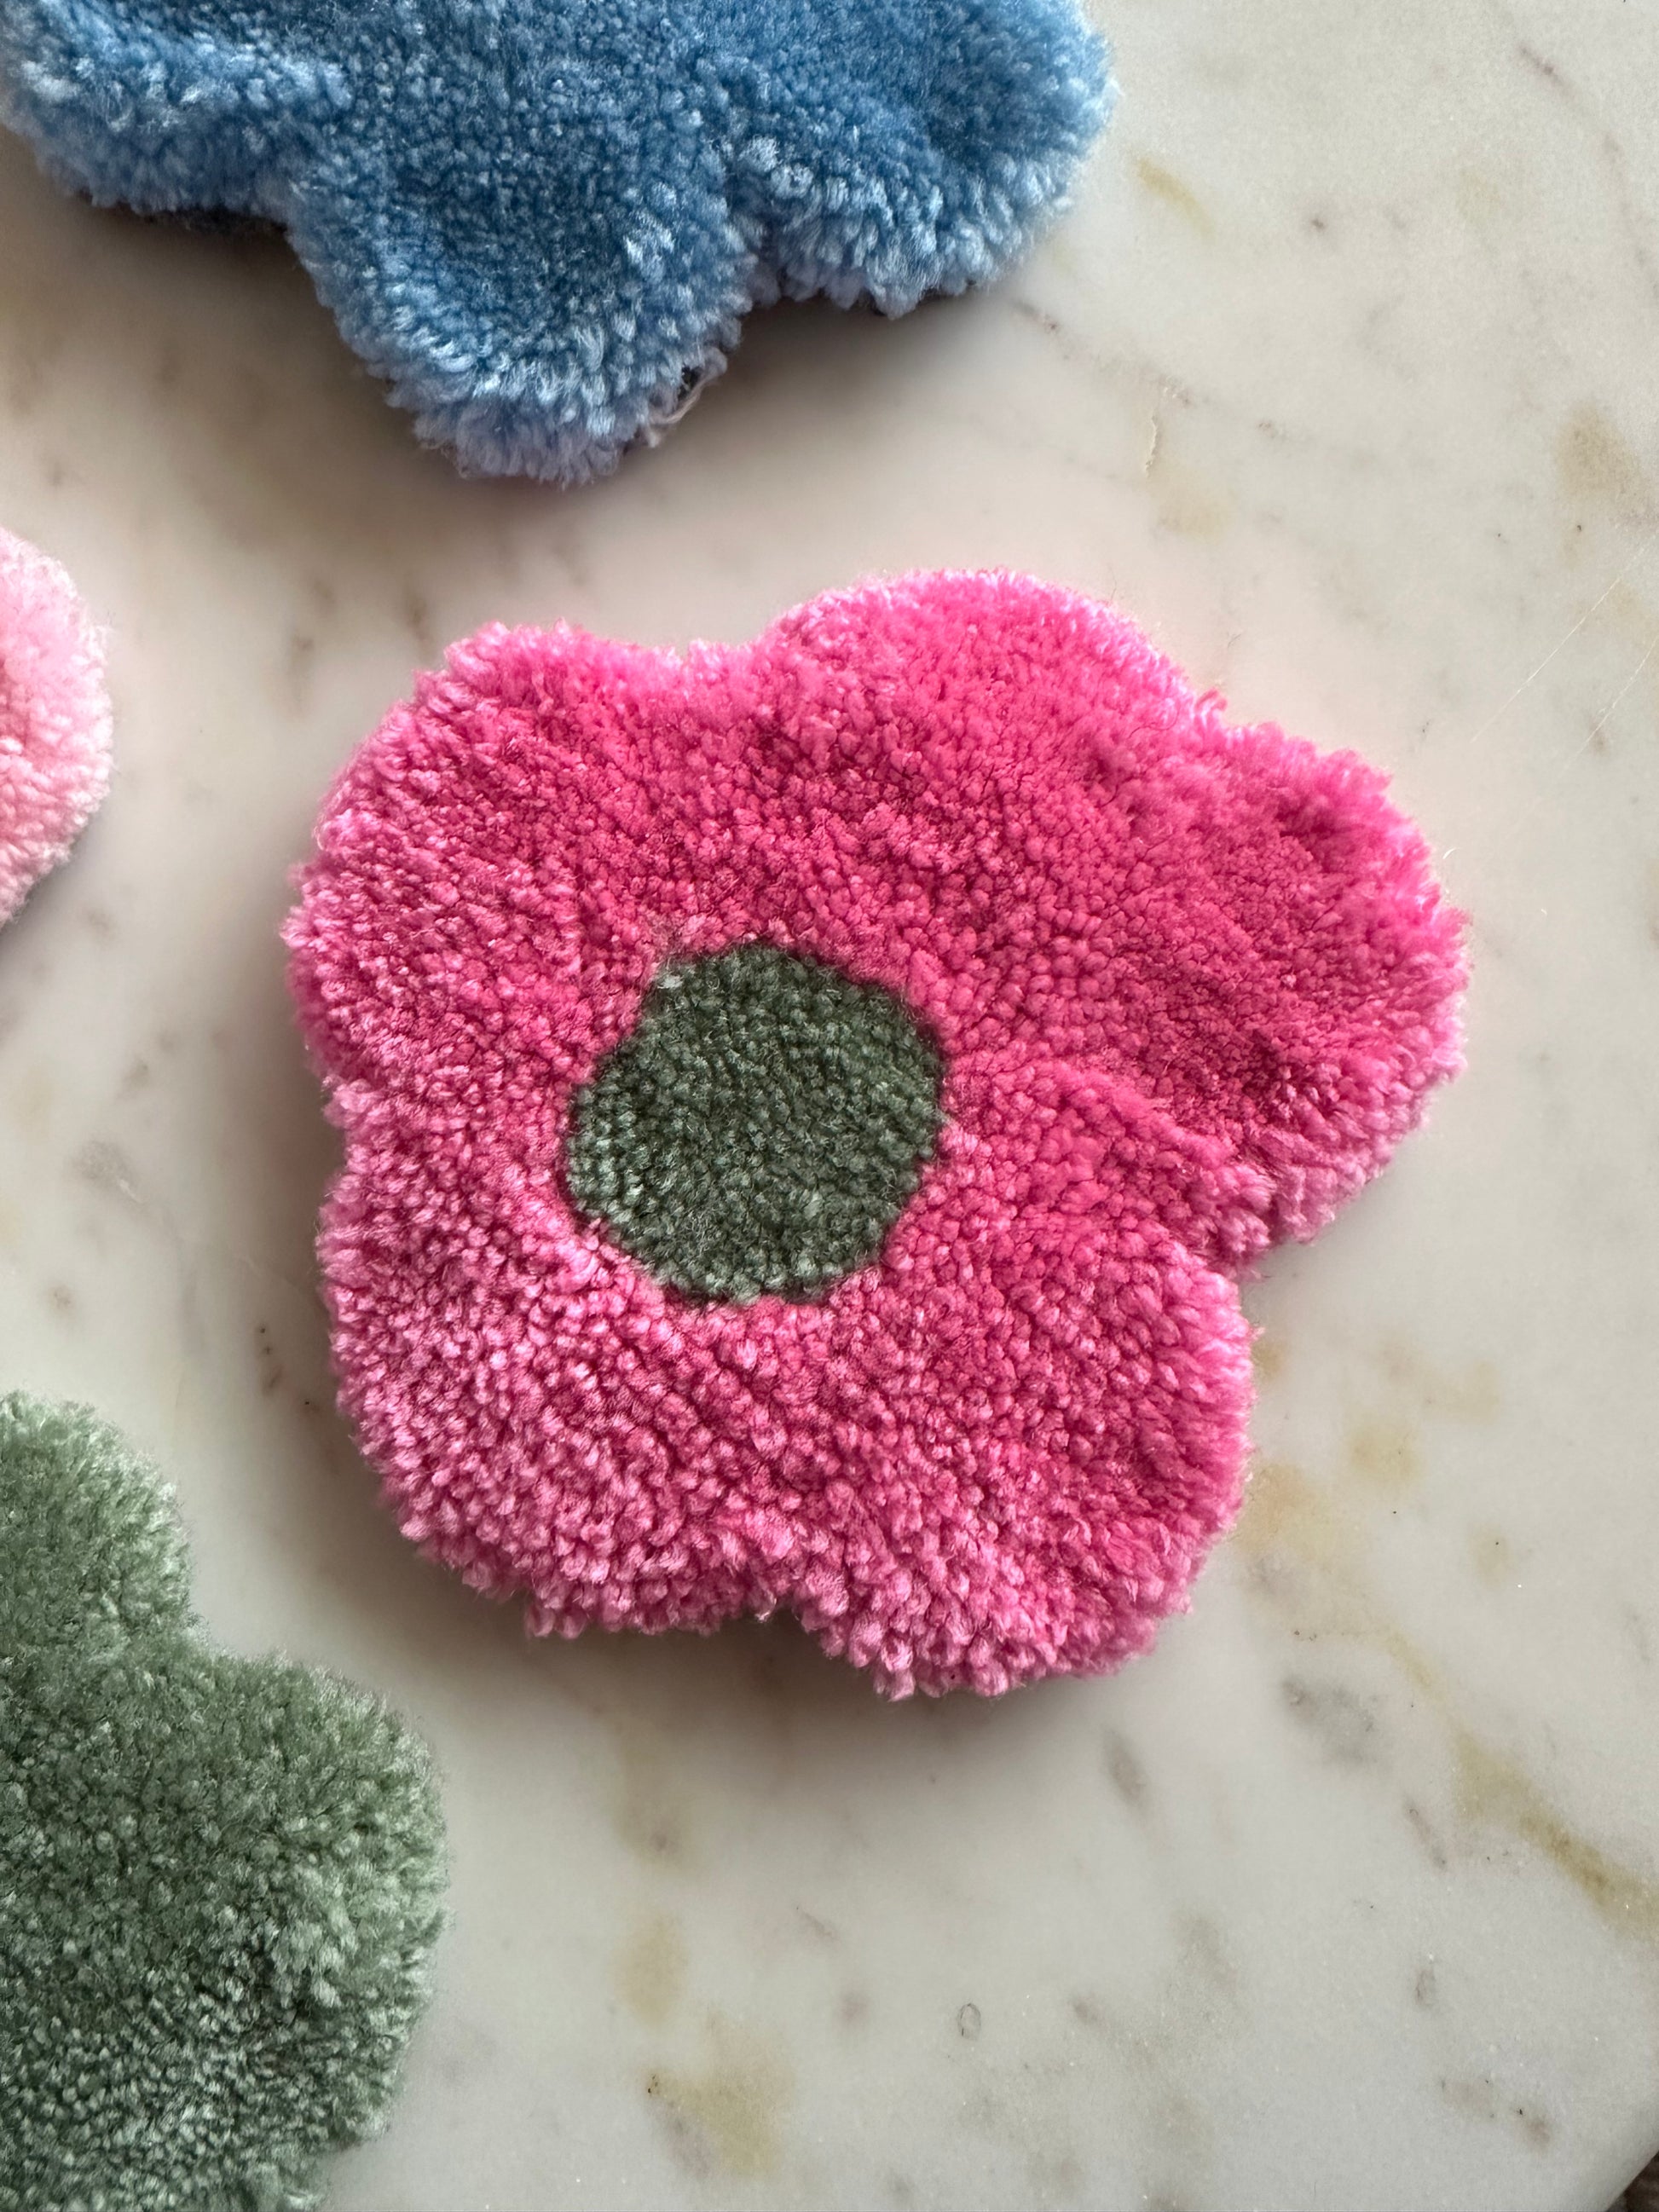 Shows one of our tufted flower coasters with pink petals and a green core. Made by The Woollers